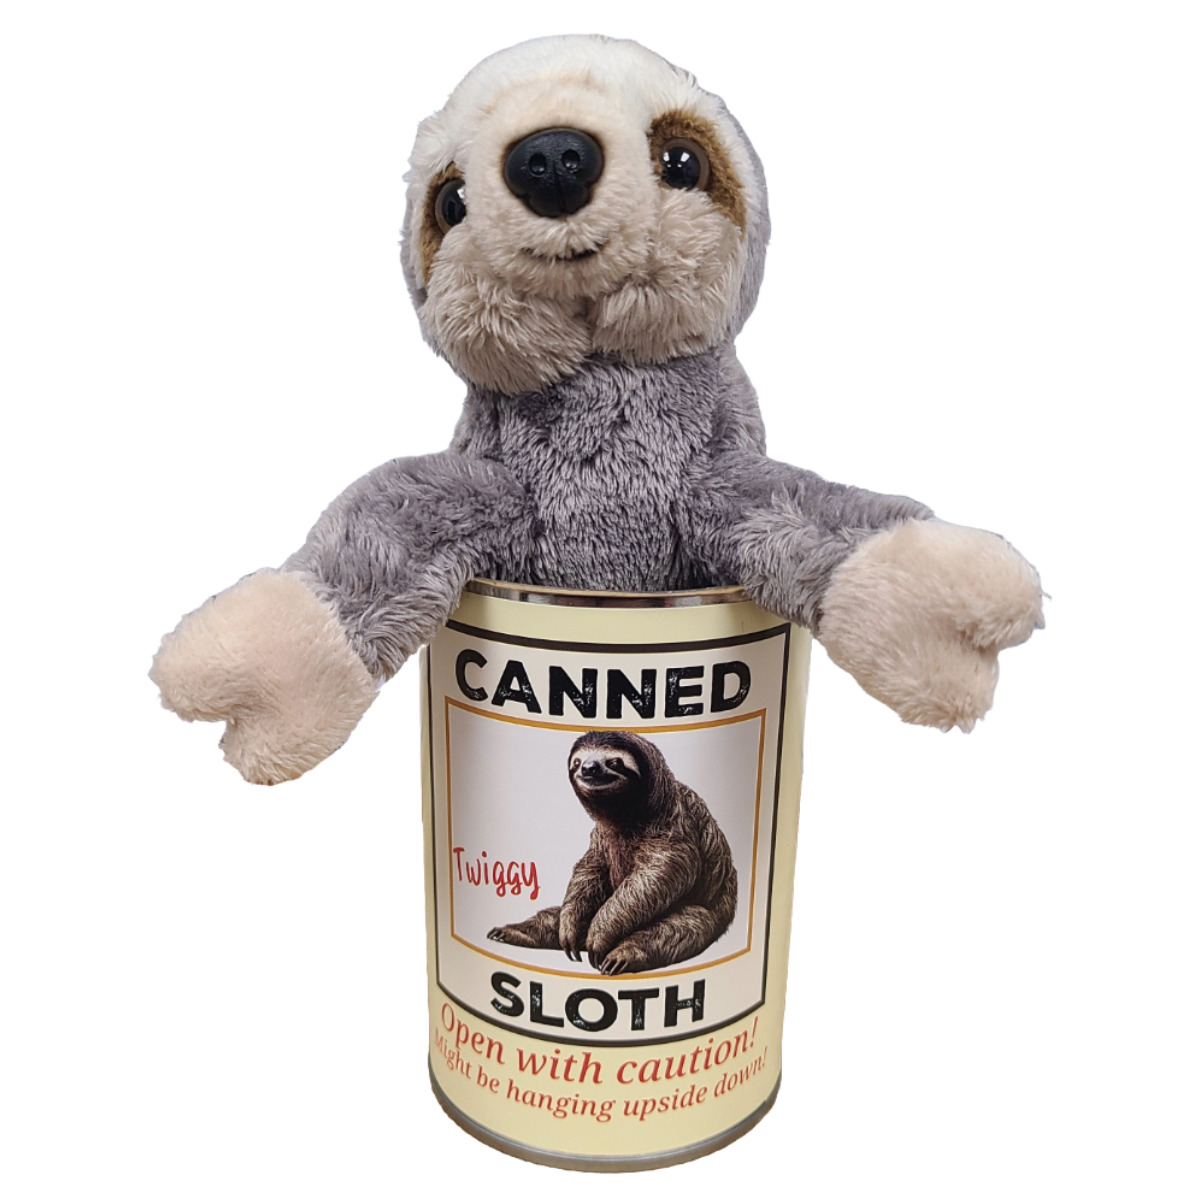 Fun Unique Gifts - Twiggy the Canned Sloth - Plush Sloth in a Tin Can w/Jokes